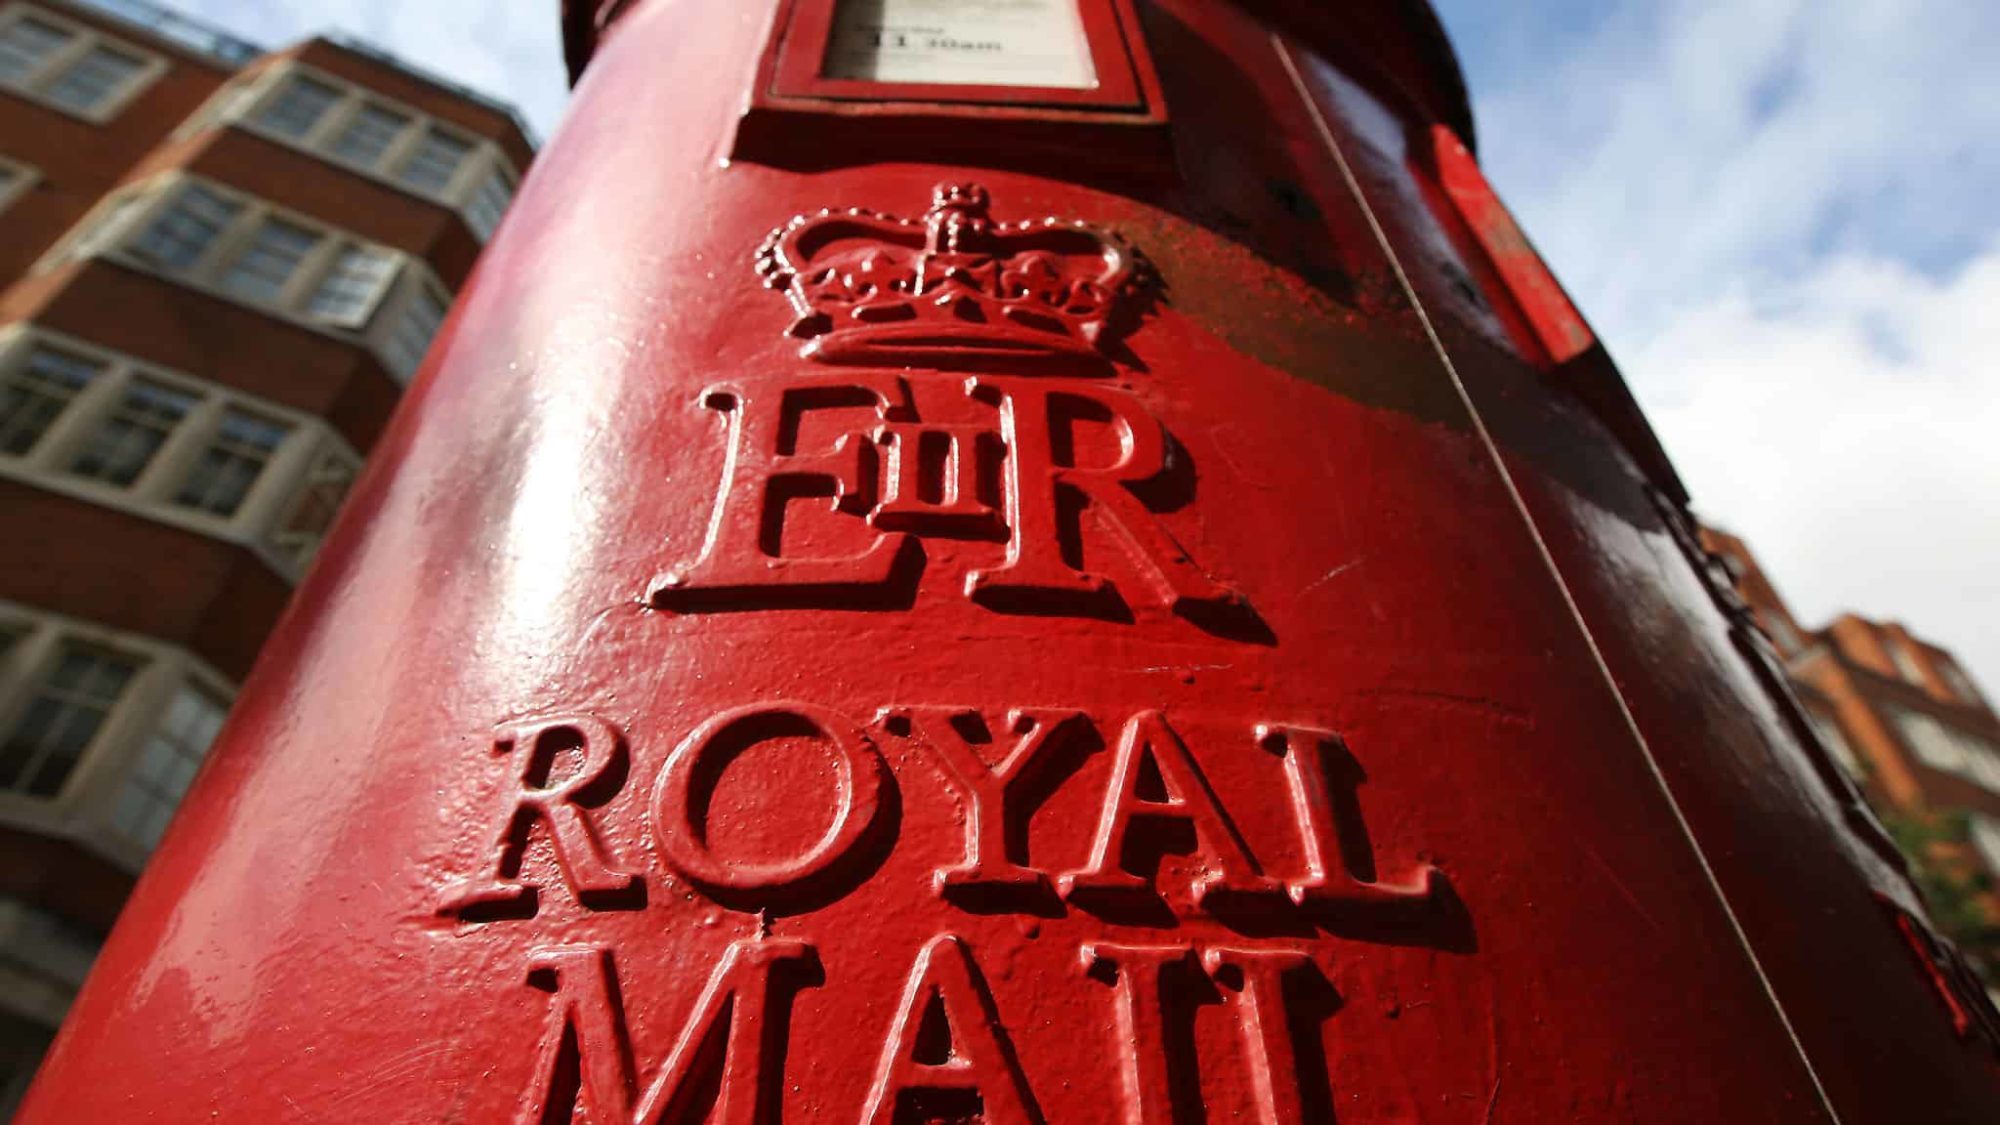 Royal Mail confirms High Court injunction over unlawful CWU ballot